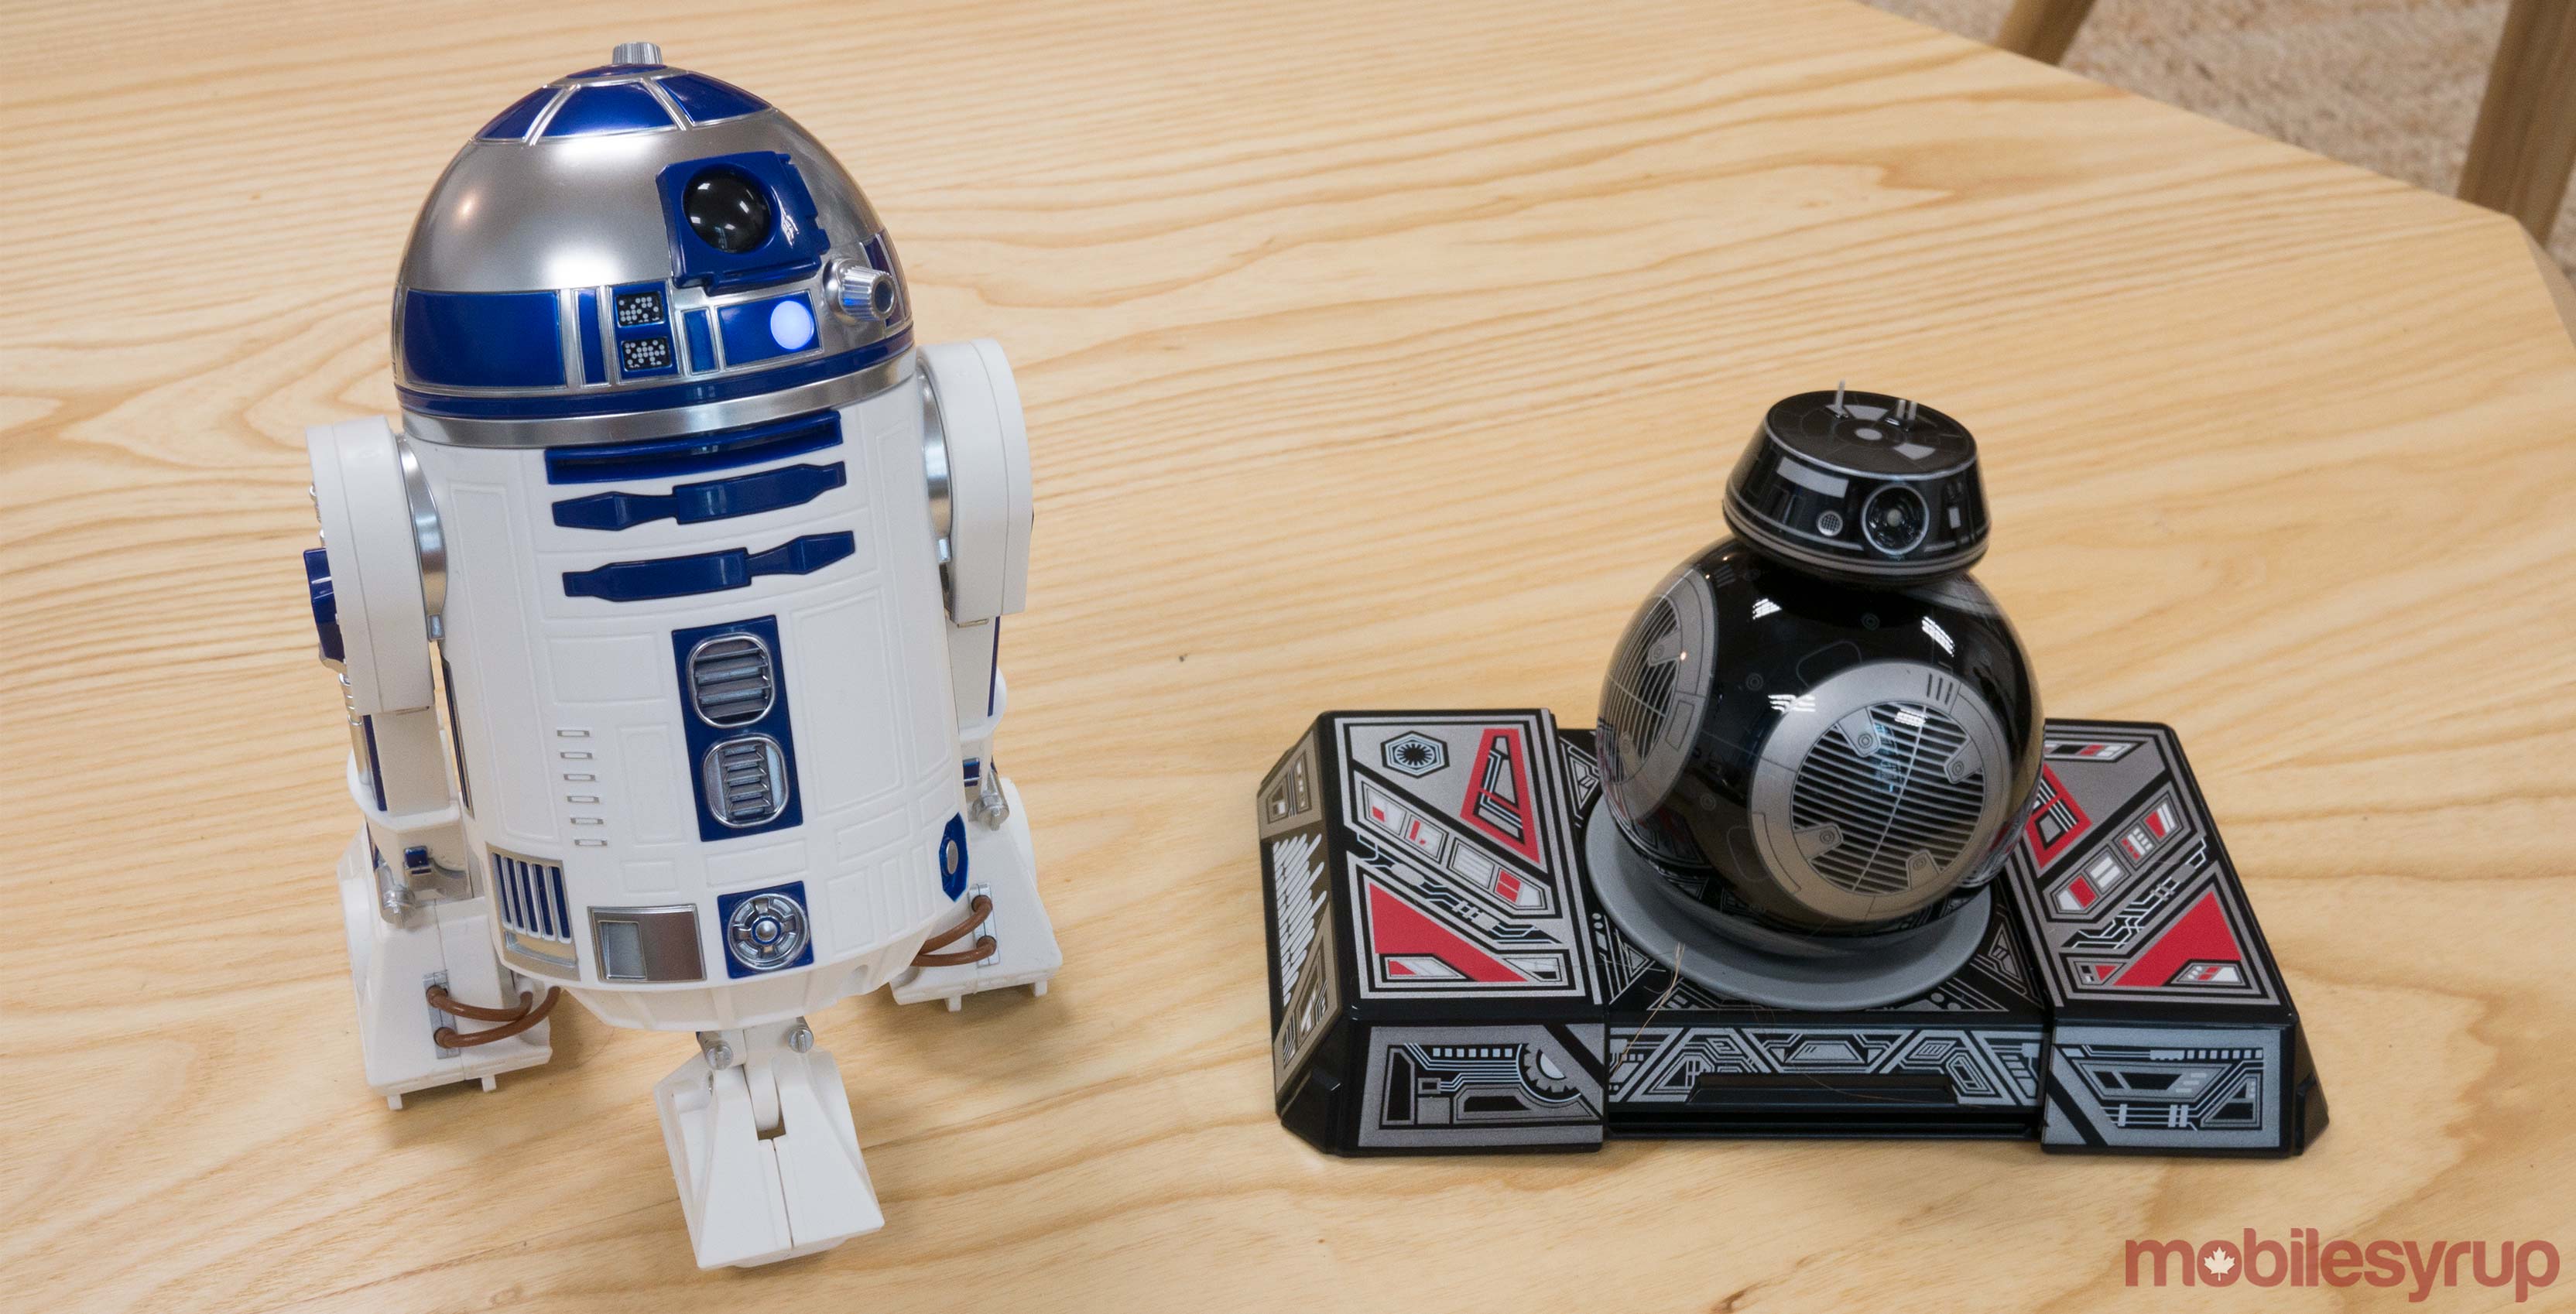 BB-9E and R2-D2